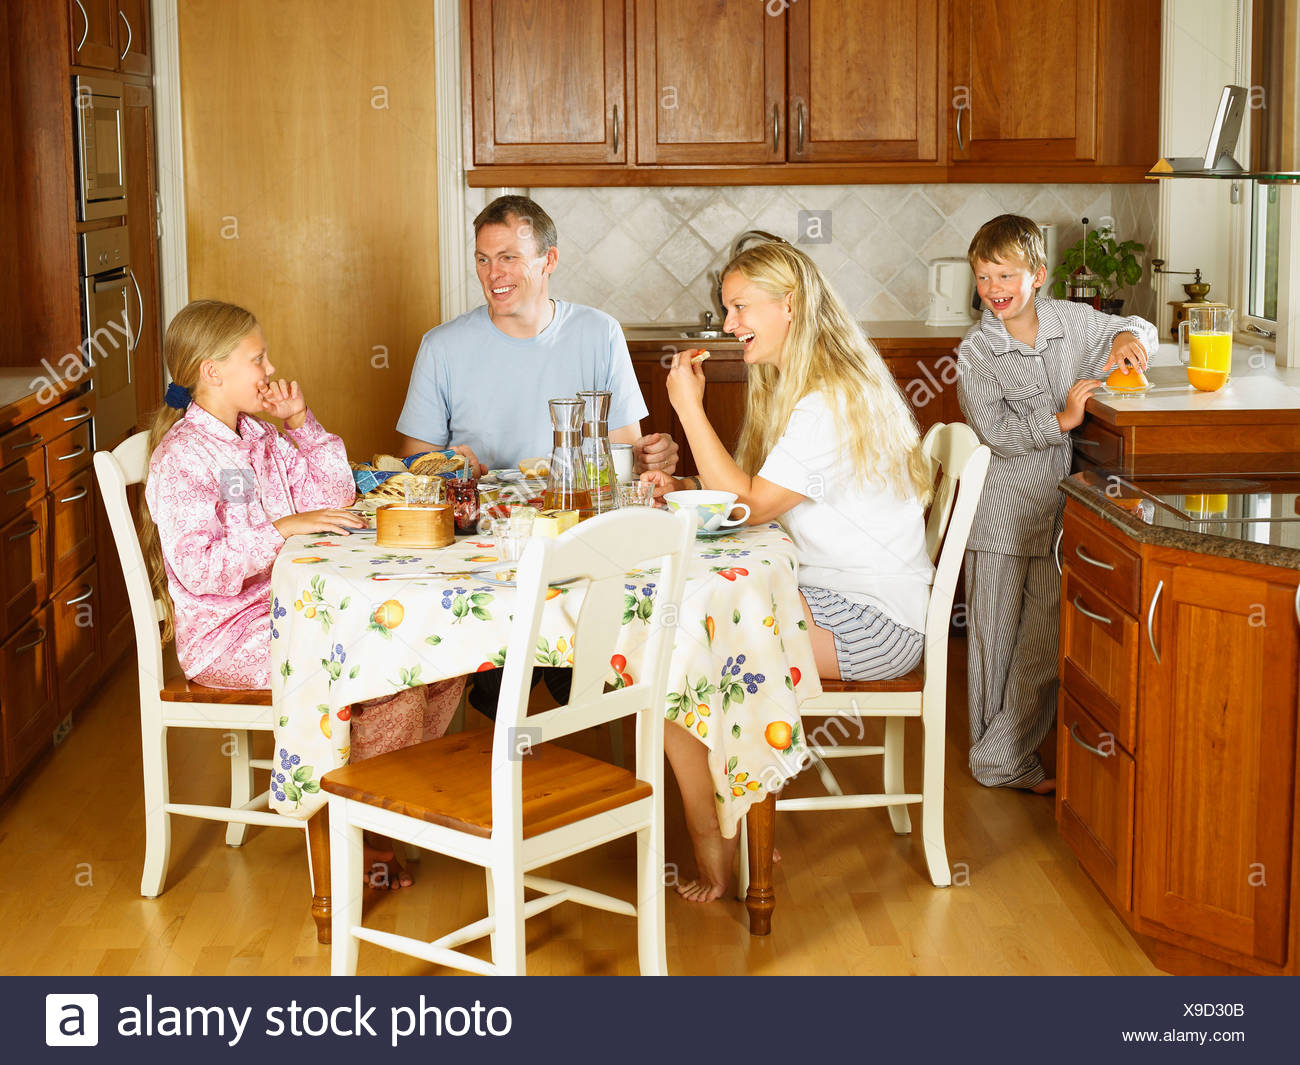 Family Sitting At Kitchen Table Eating Breakfast Smiling Stock